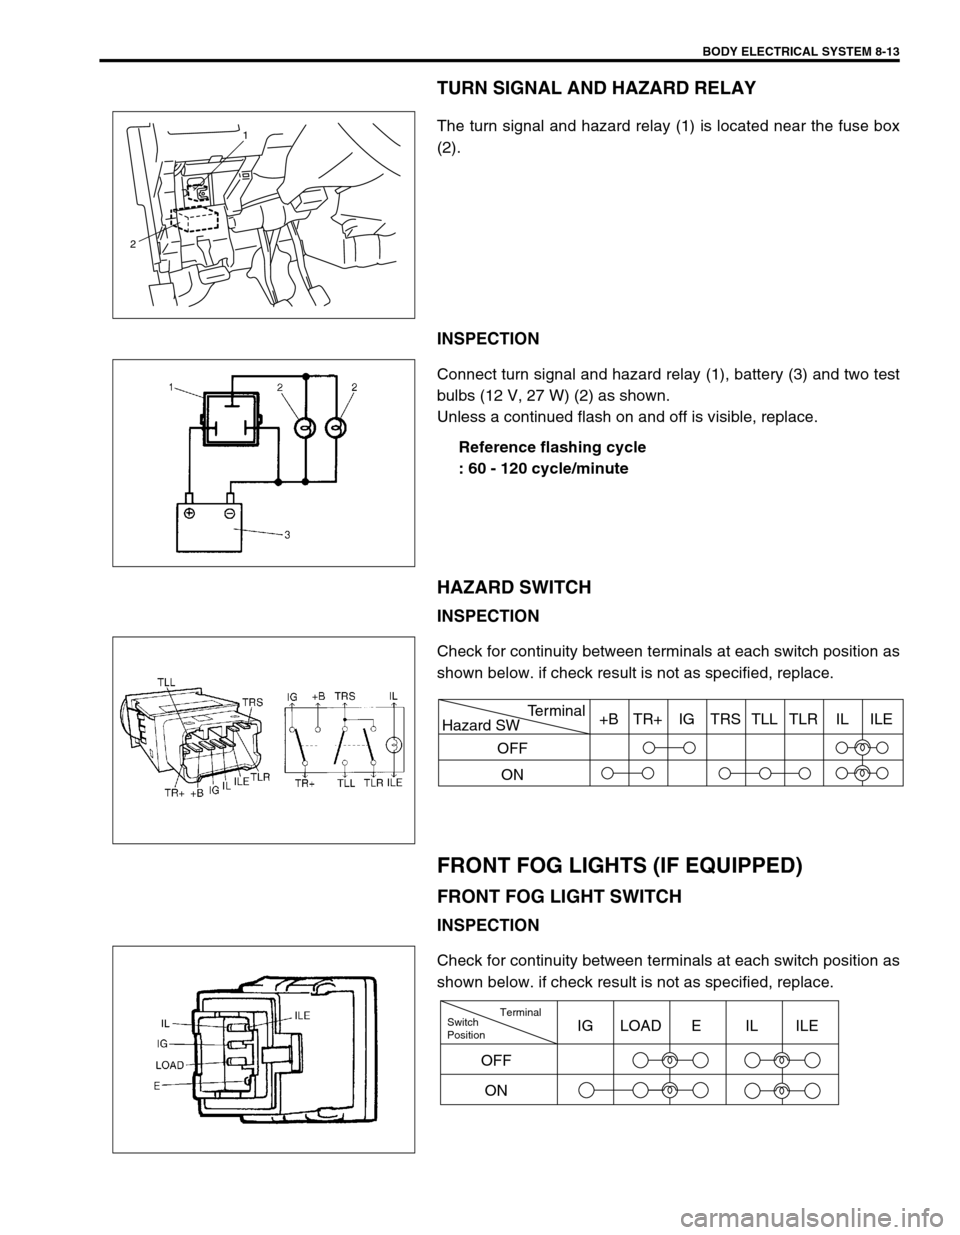 SUZUKI SWIFT 2000 1.G Transmission Service Workshop Manual BODY ELECTRICAL SYSTEM 8-13
TURN SIGNAL AND HAZARD RELAY
The turn signal and hazard relay (1) is located near the fuse box
(2).
INSPECTION
Connect turn signal and hazard relay (1), battery (3) and two